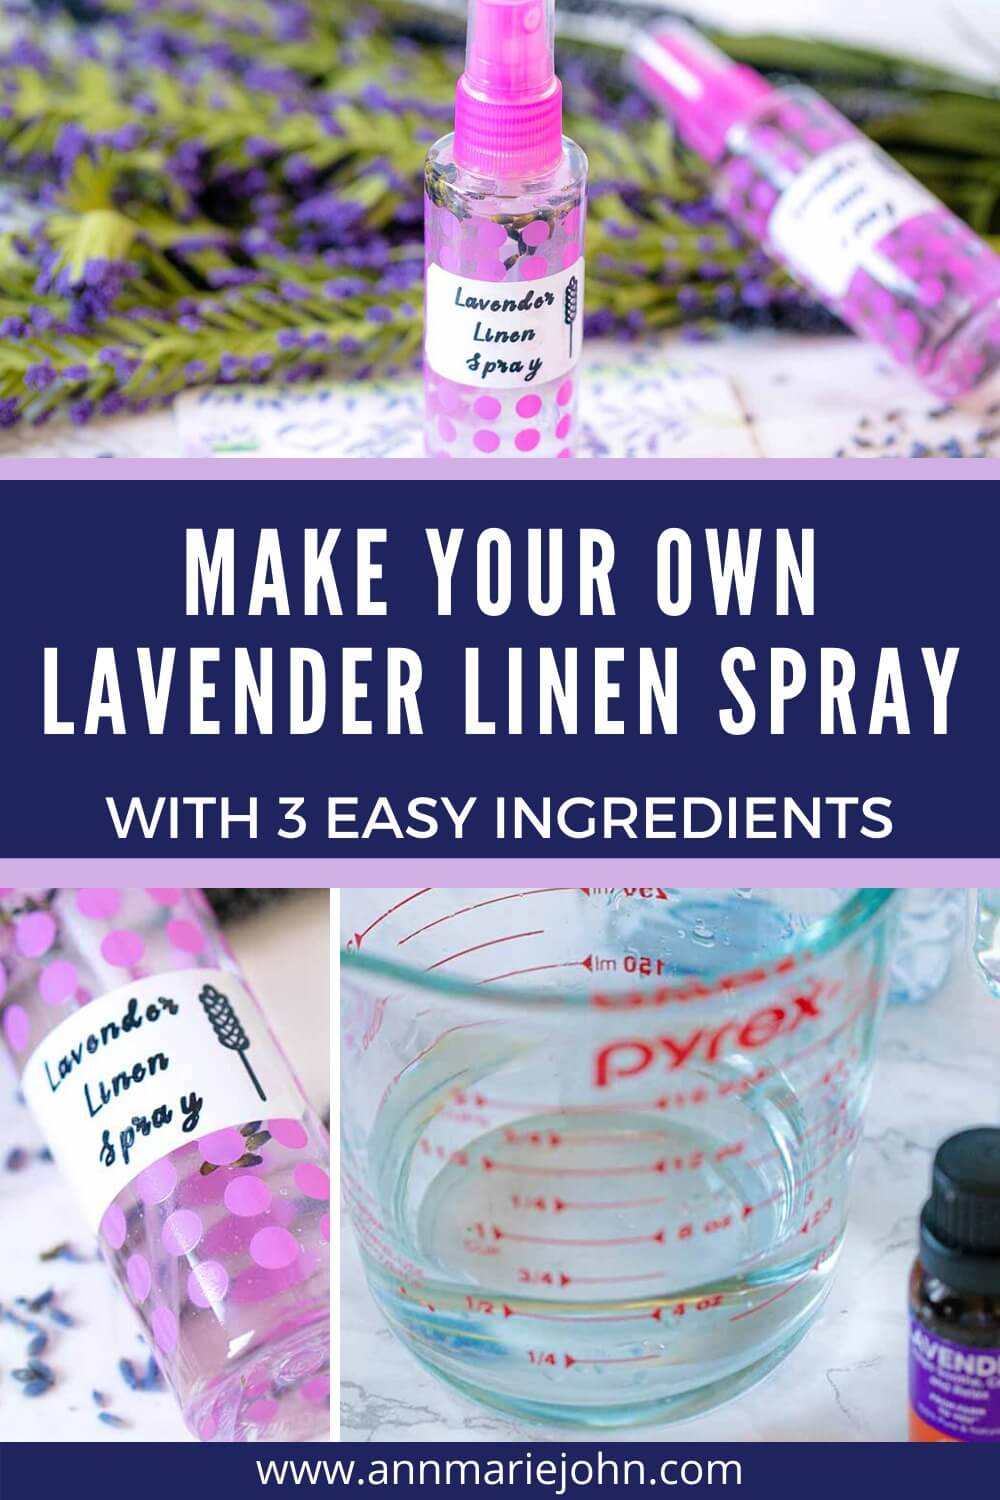 Make Your Own Lavender Linen Spray With 3 Easy Ingredients